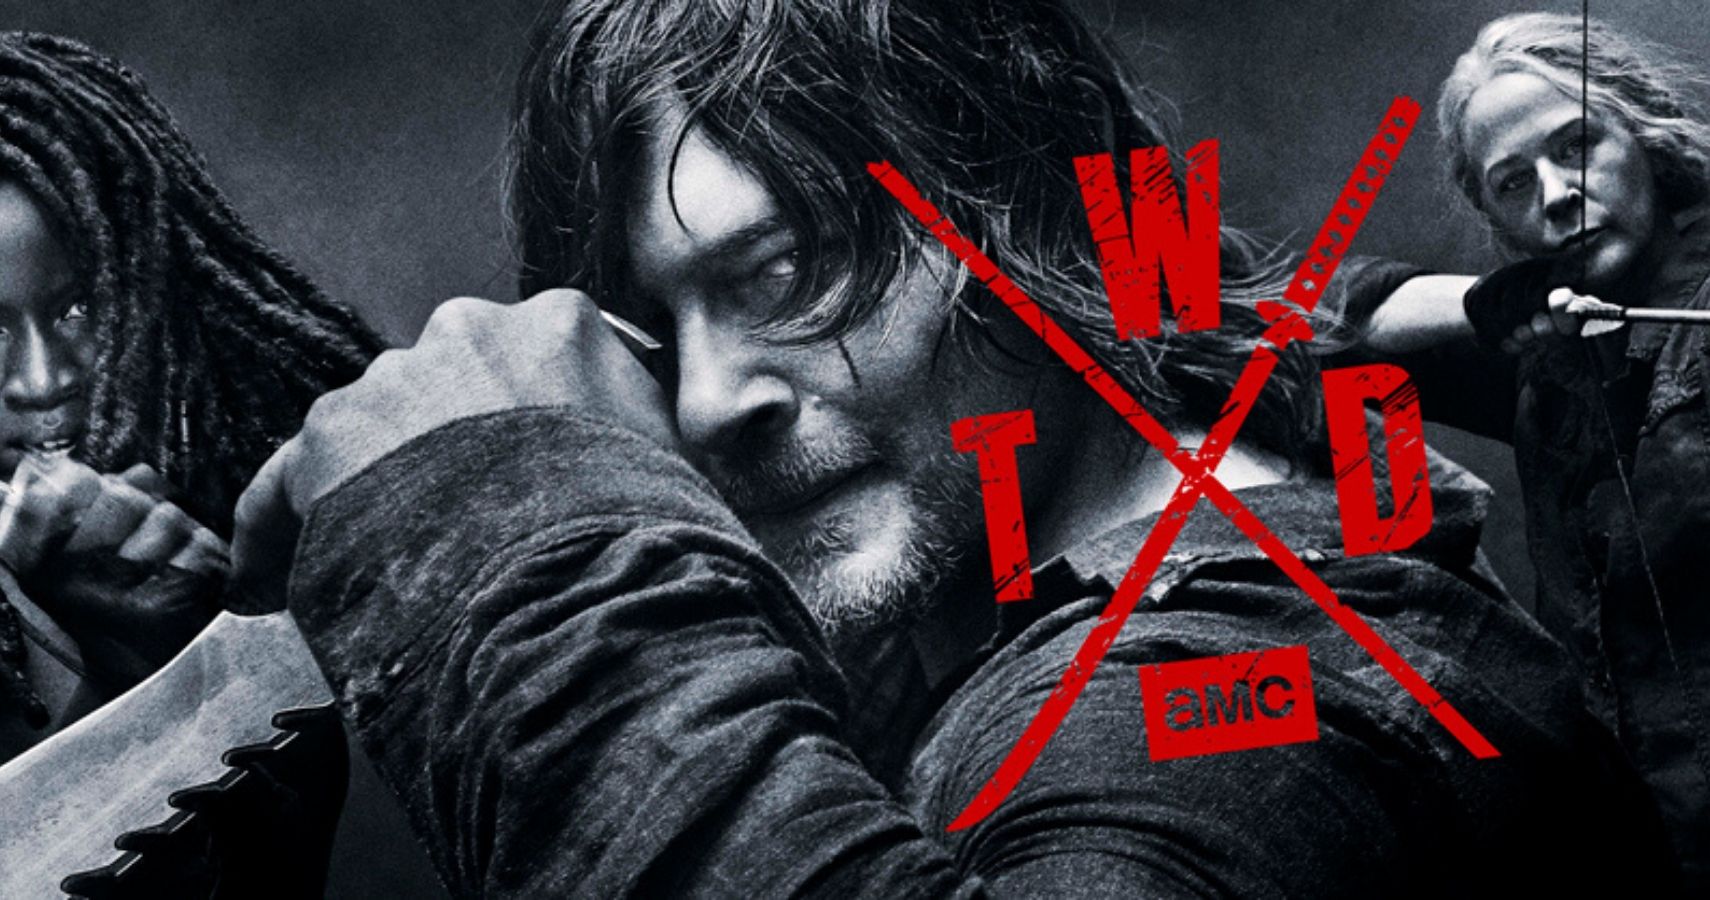 The Walking Dead 5 Characters Who Got Better As The Show Went On (& 5 Who Got Worse)